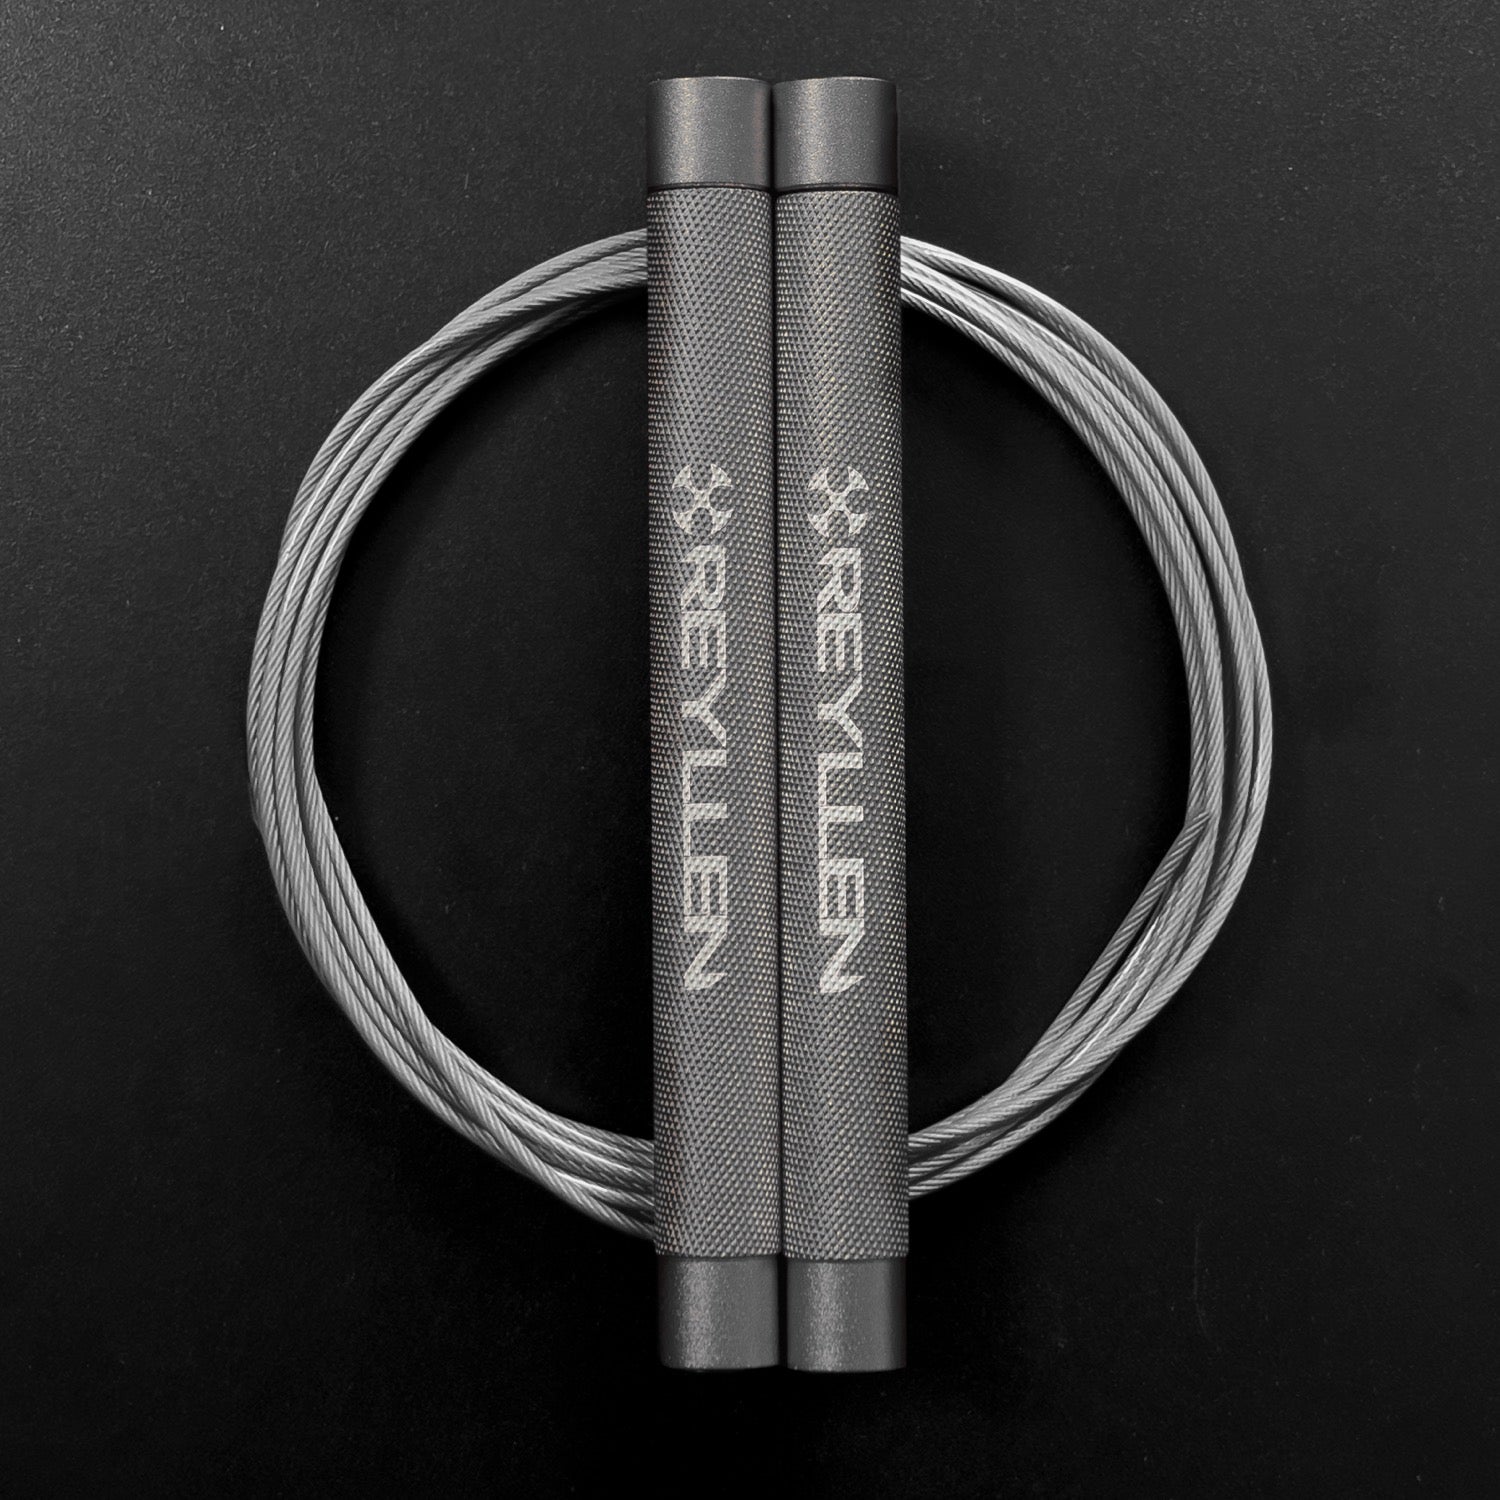 Reyllen Flare Mx Speed Skipping Jump Rope - Aluminium Handles - silver with grey nylon coated cable